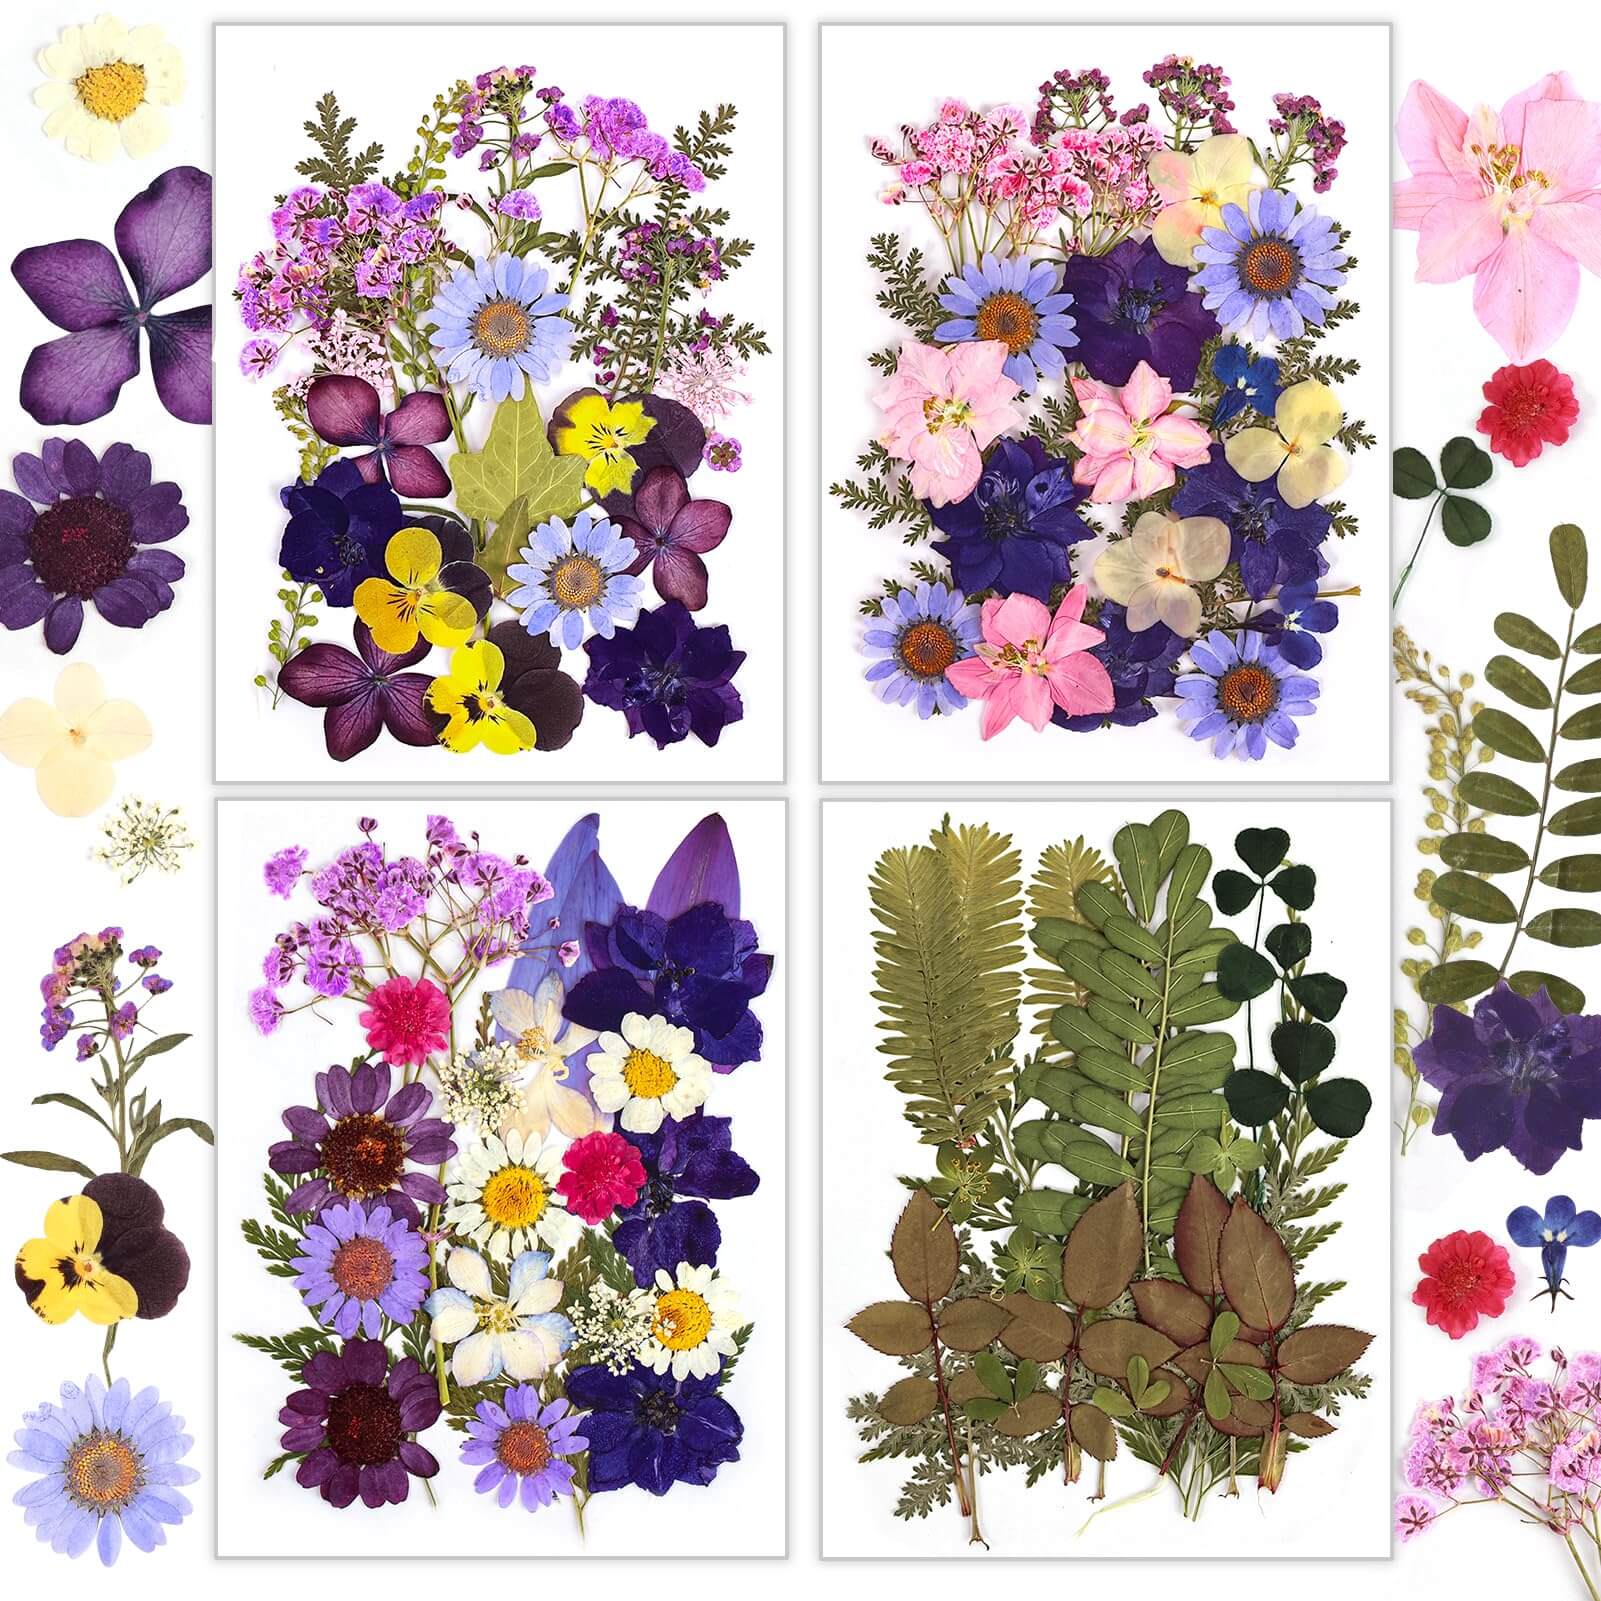 Resiners® 100Pcs Dried Flowers for Resin Molds, Natural Flowers, Real  Pressed Flowers Dry Leaves Kit for Resin Crafts